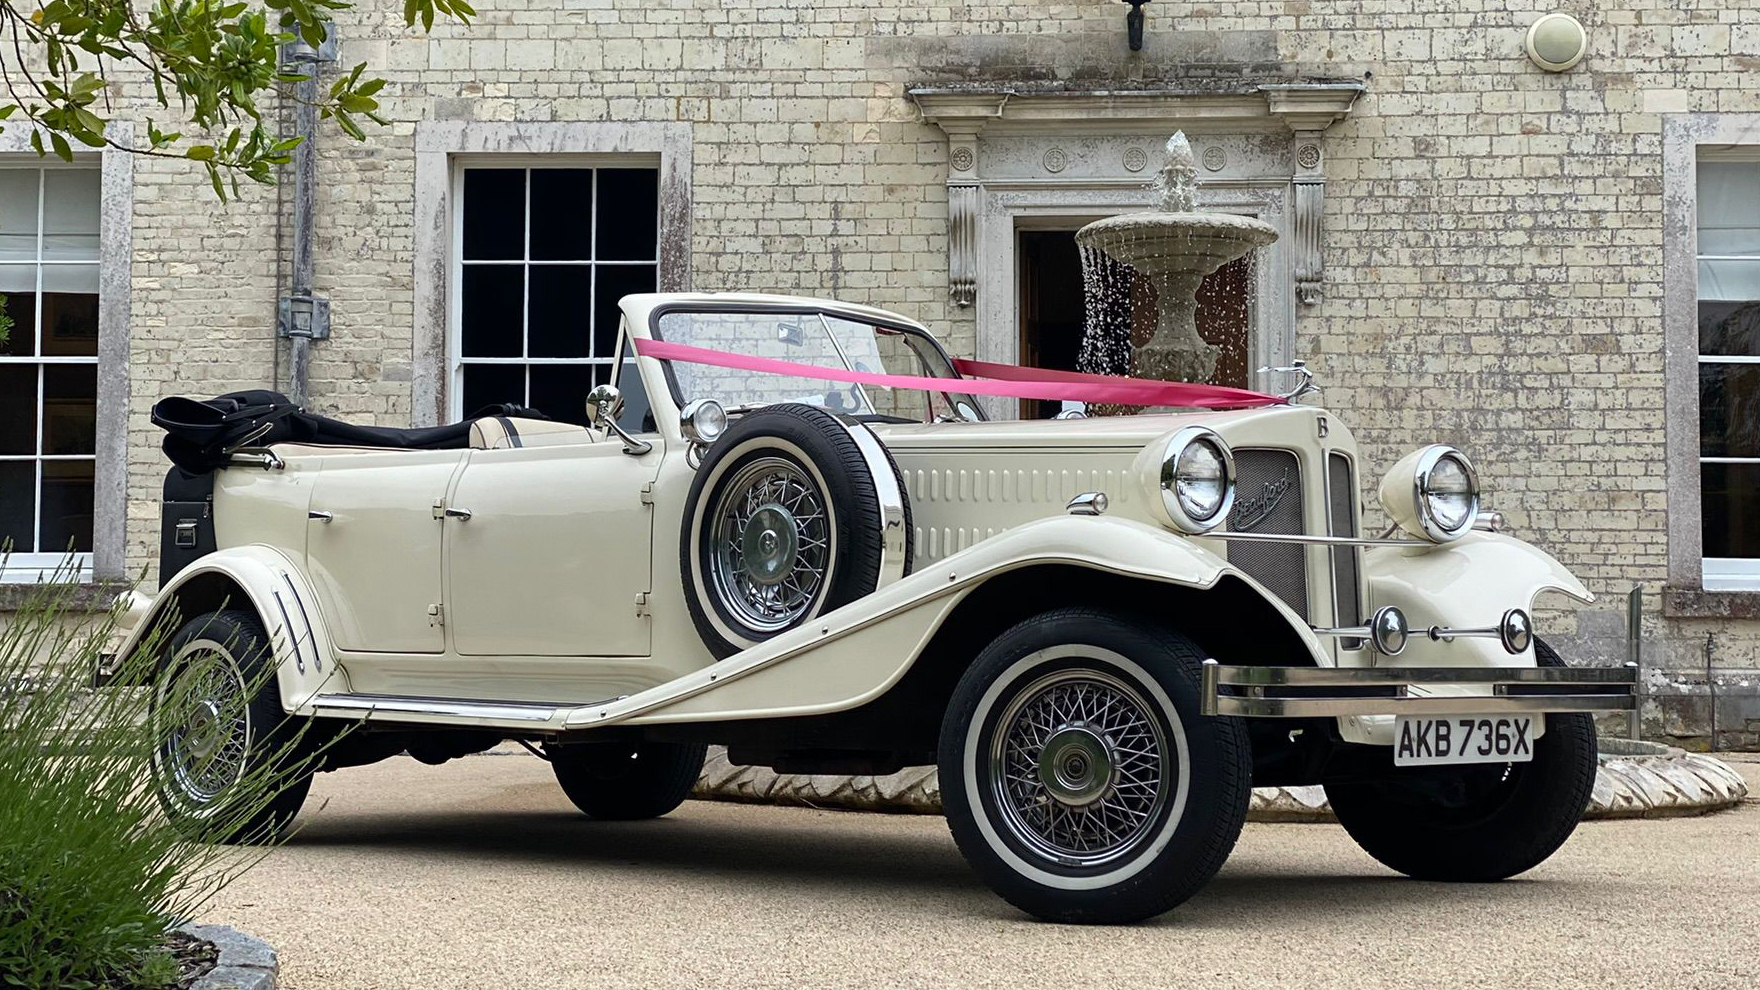 Front Right side of BEauford with Convertible Roof down decorated with Red Ribbons accross its bonnet. Wedding Venue shown in the back ground